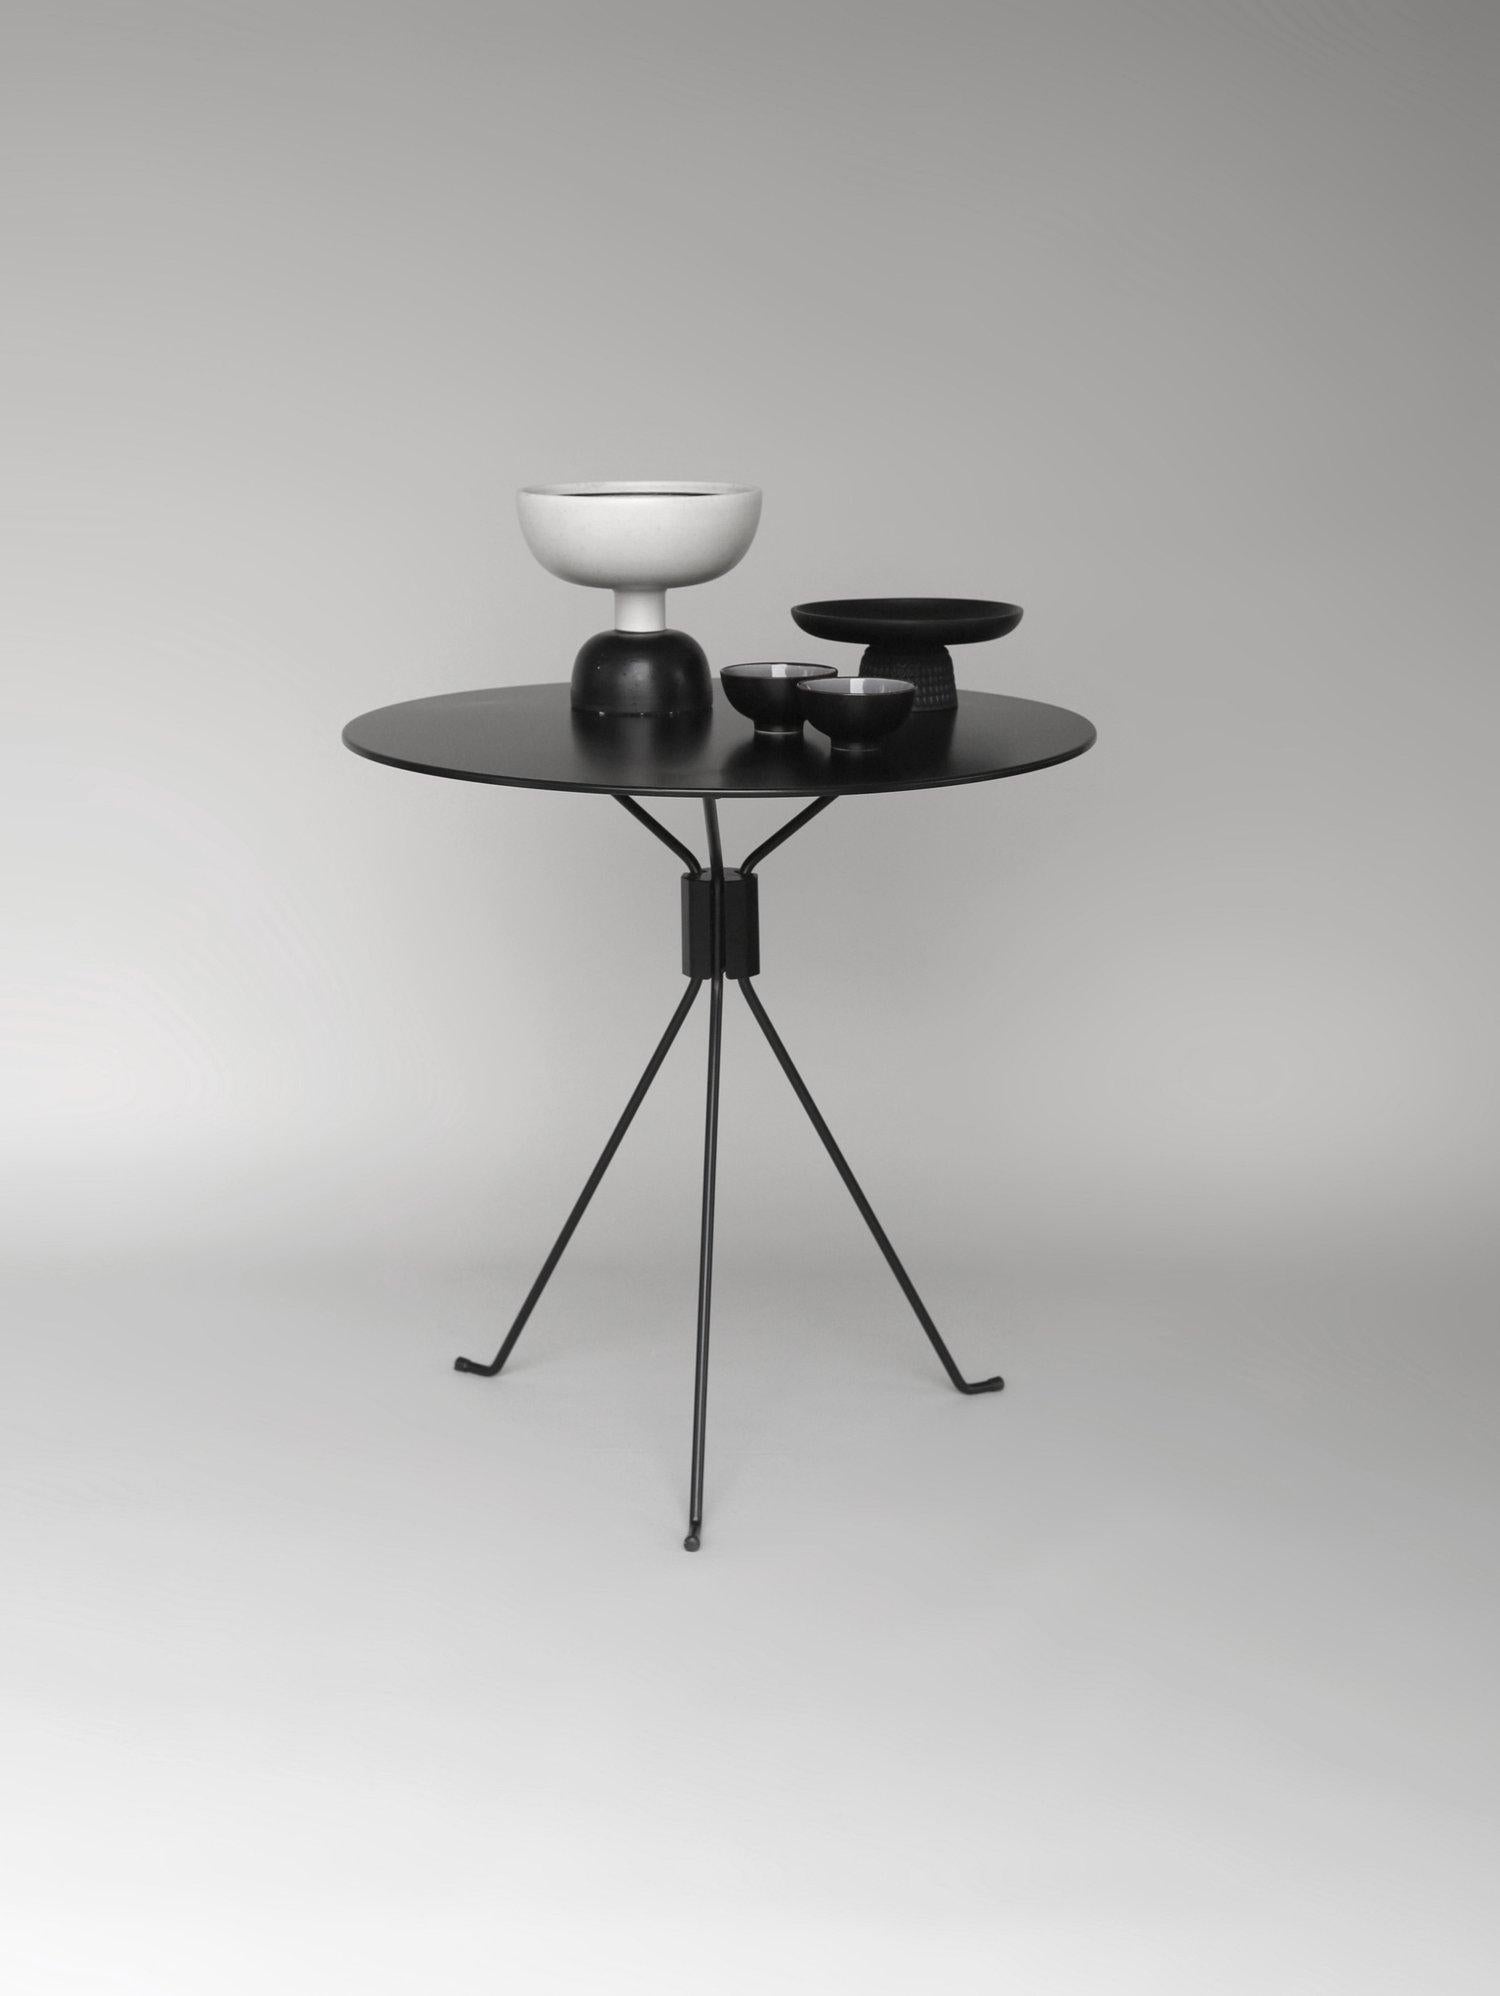 Small black Capri bond table by Cools Collection
Materials: Steel, paint.
Dimensions: Ø 75 x H 74 cm.
Available in black or white table top.

COOLS Collection was launched in 2020 by mother-and-daughter duo Stefania Andorlini and Maria